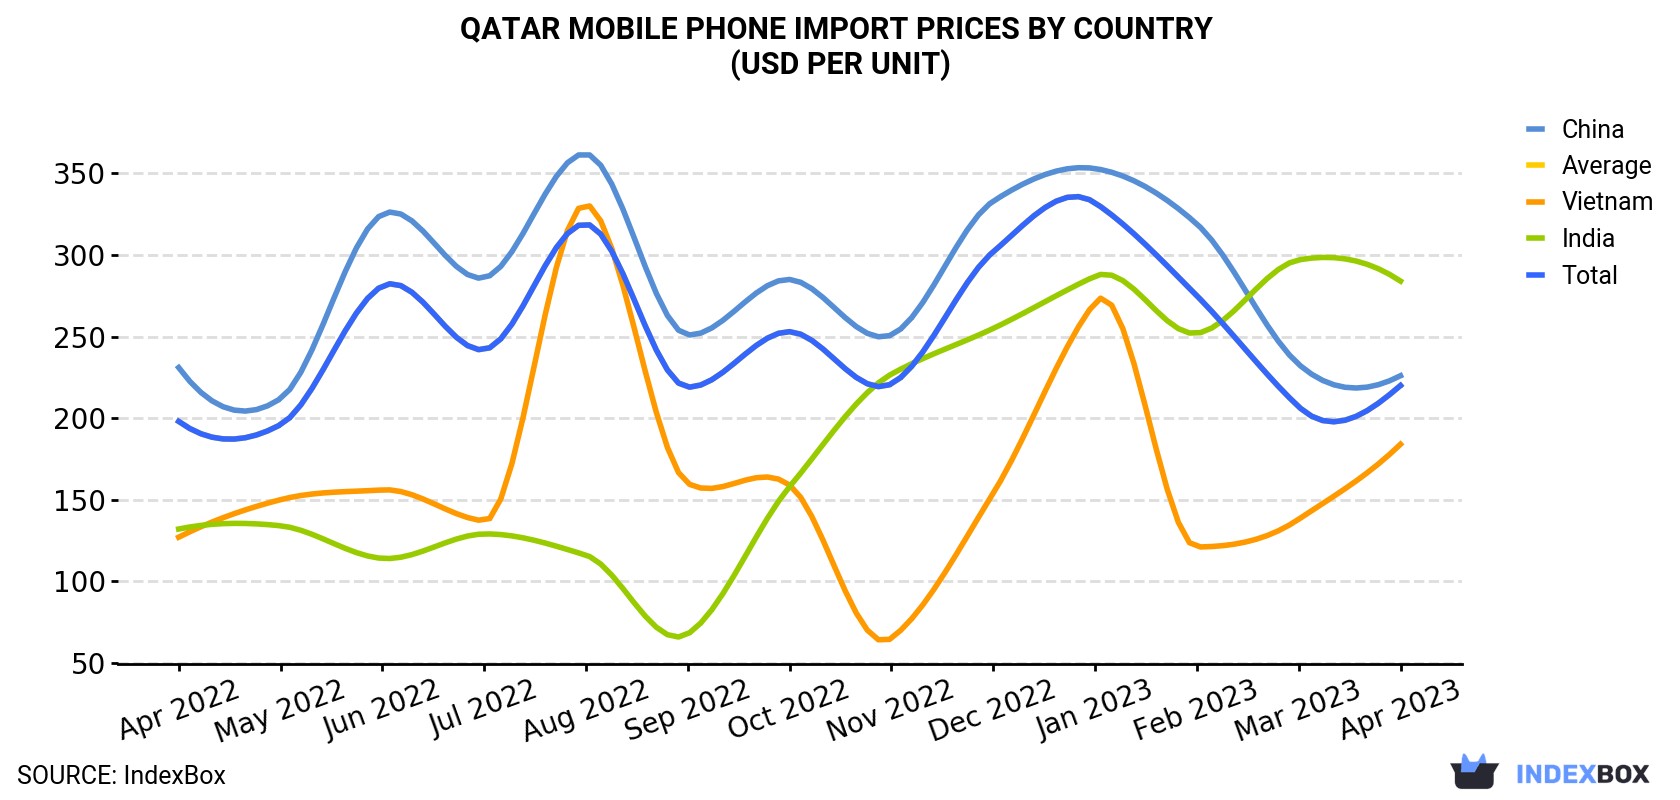 Qatar Mobile Phone Import Prices By Country (USD Per Unit)